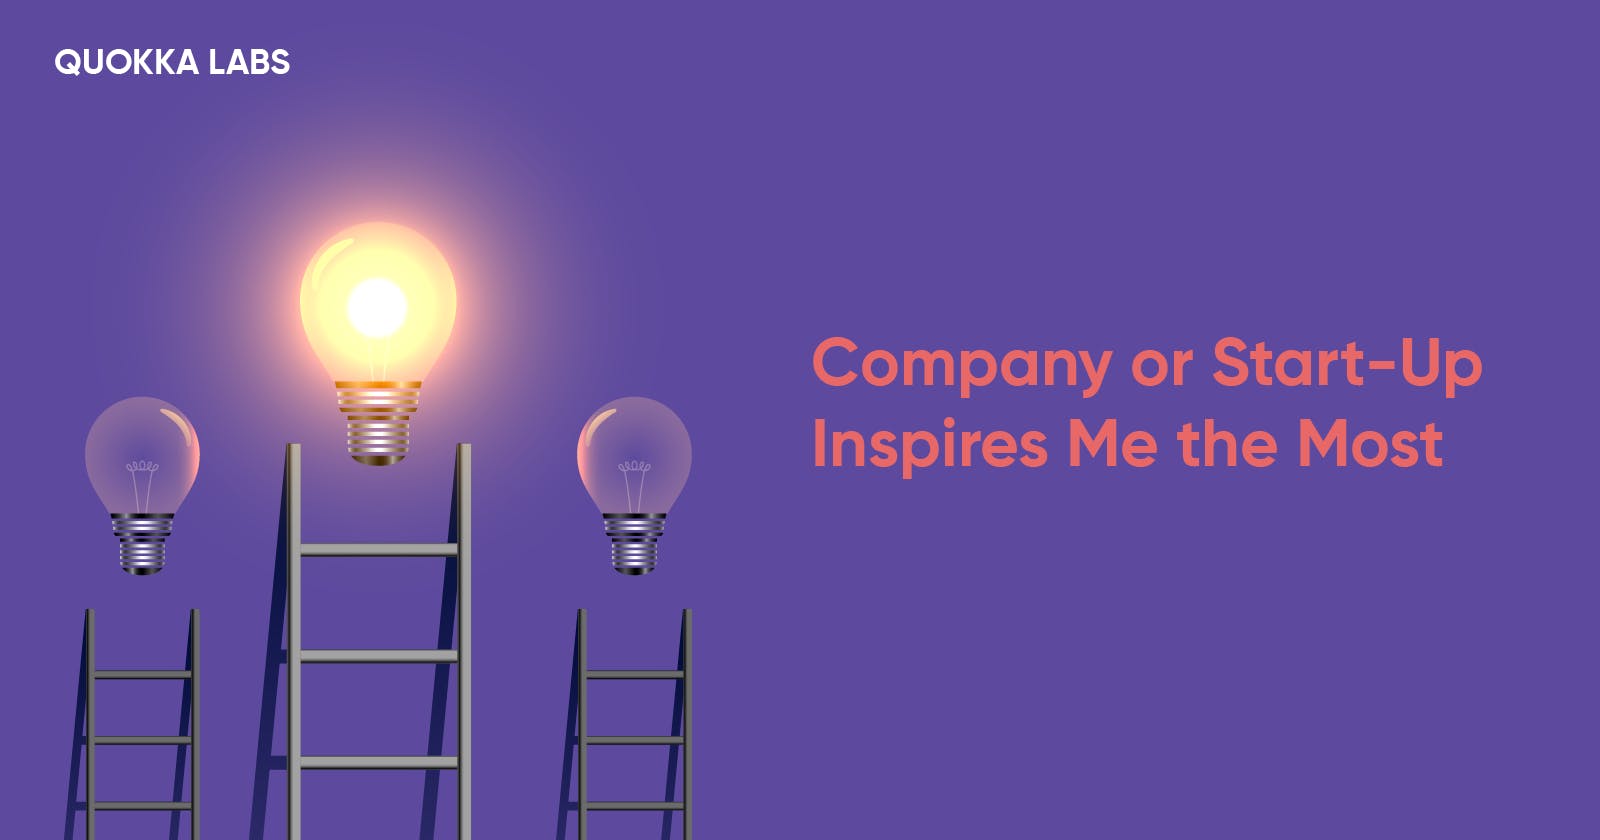 Which Company or Start-Up Inspires the Most and Why?